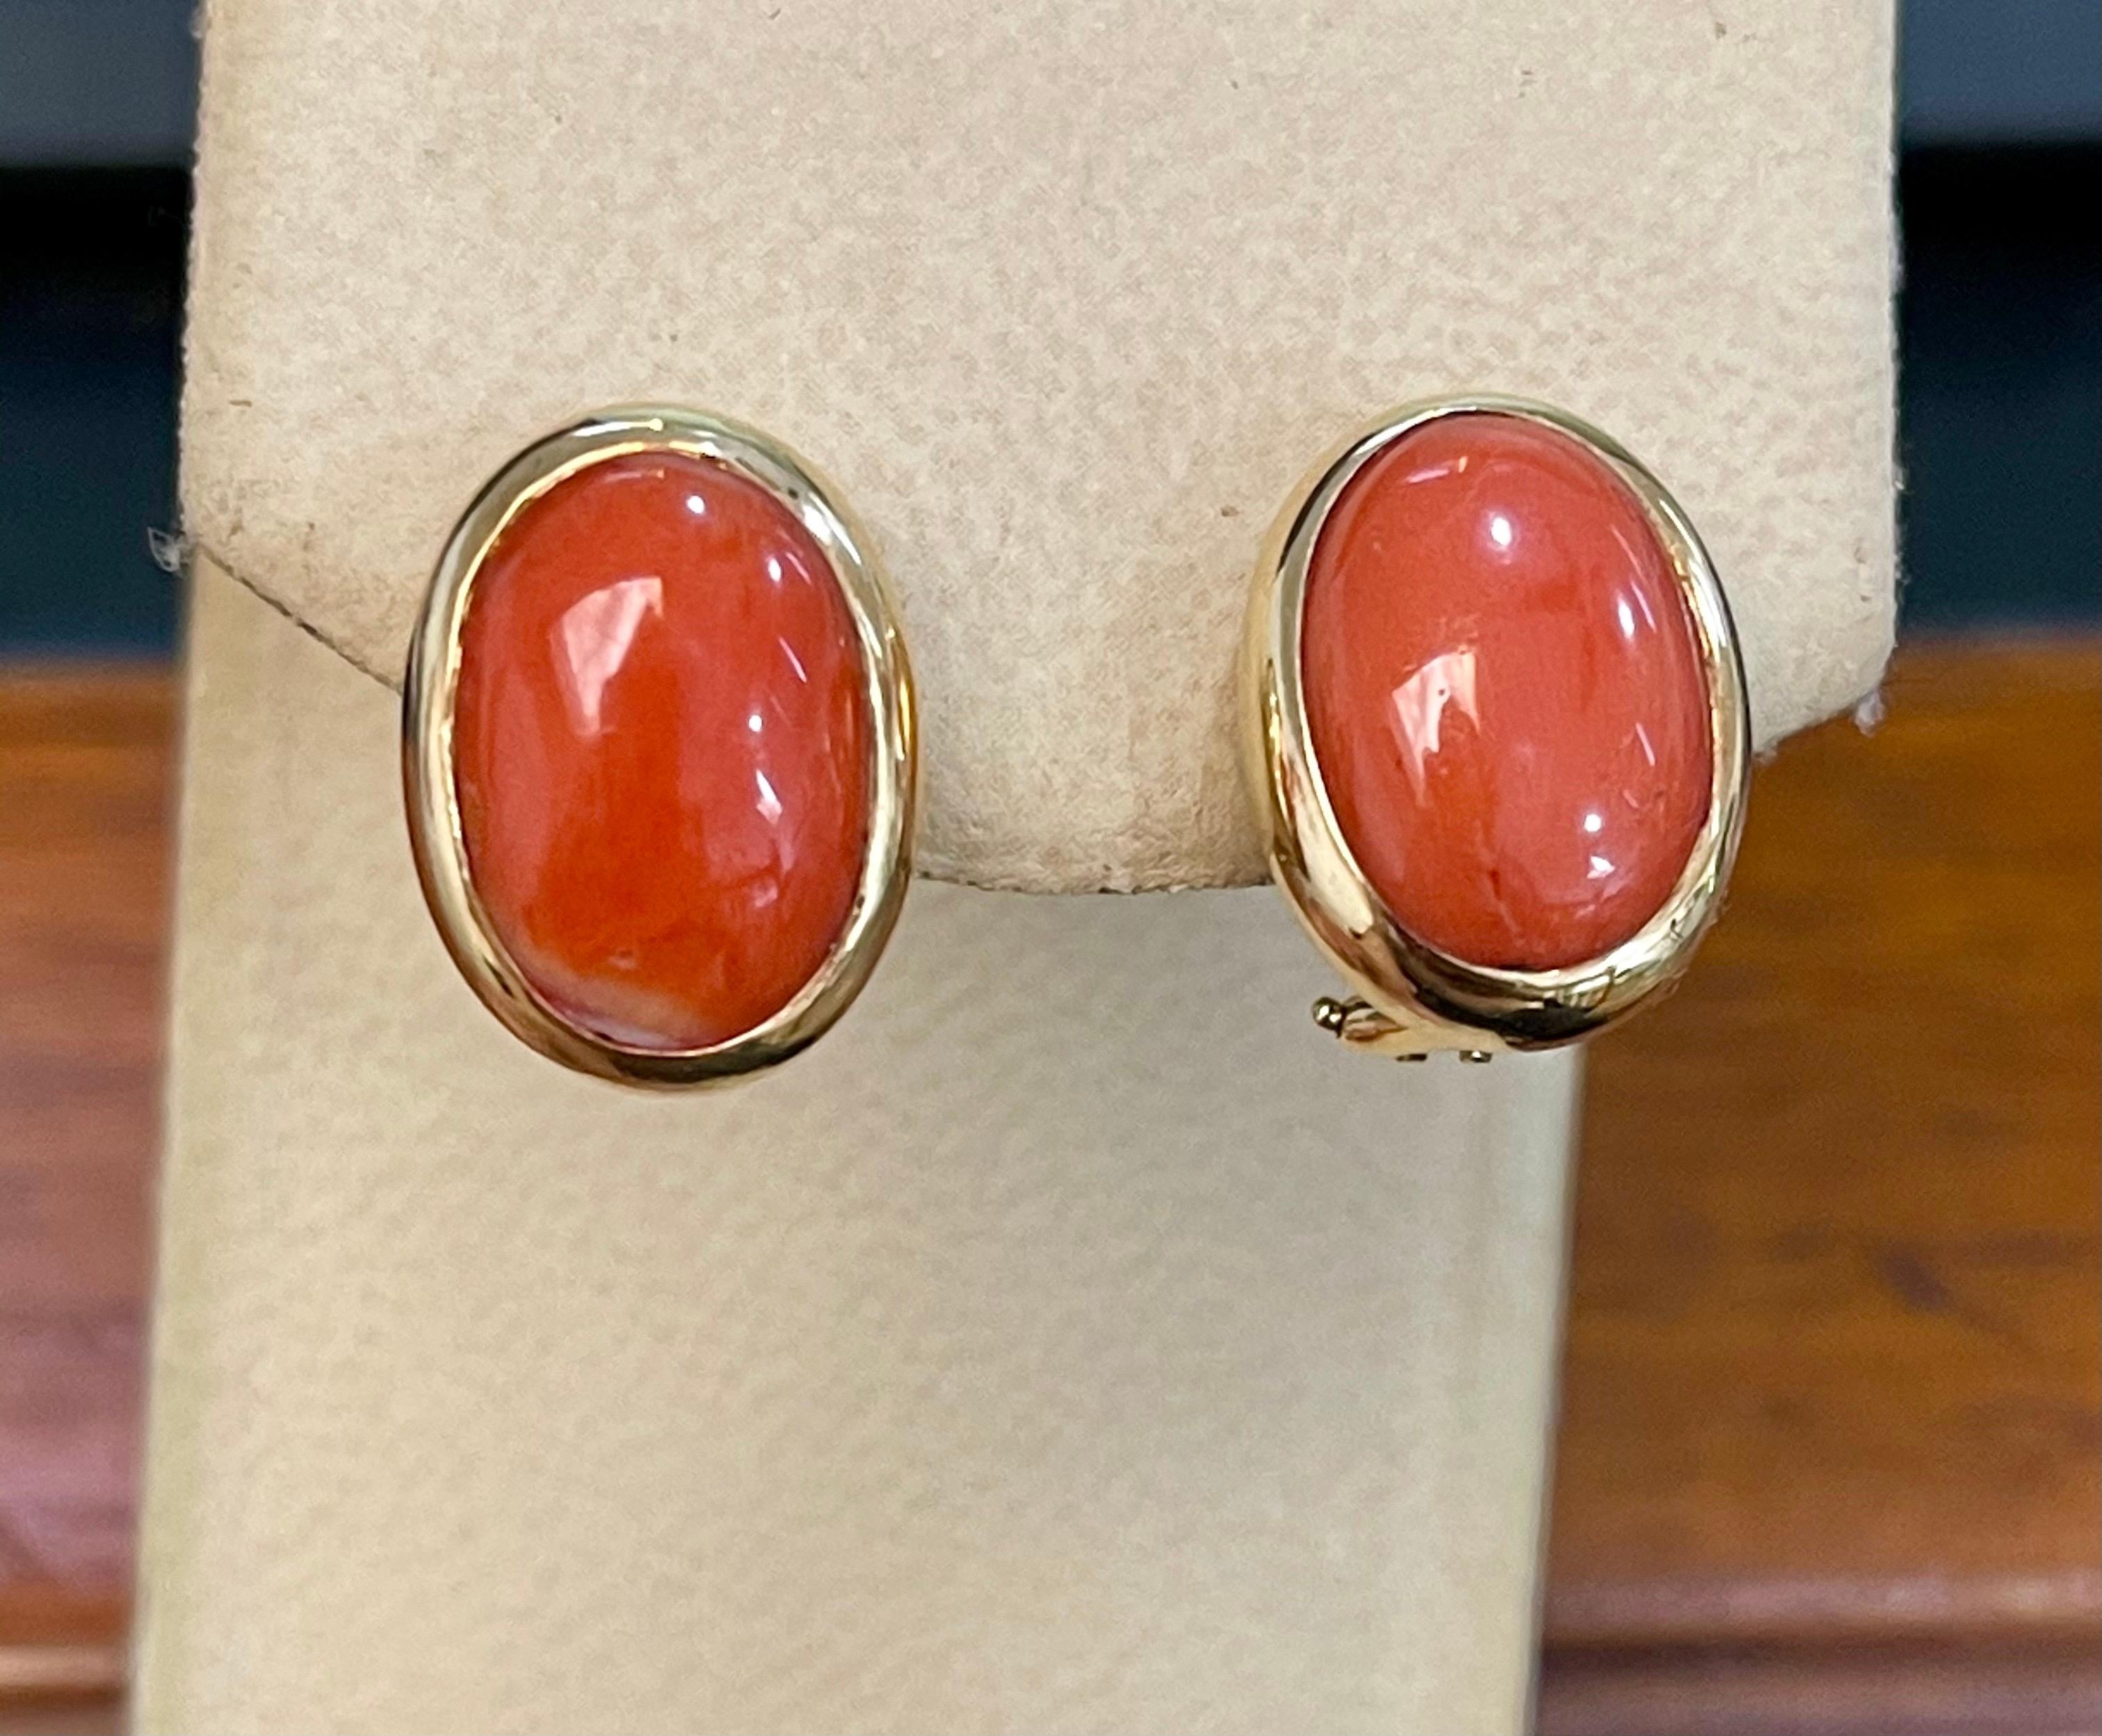  Natural Coral Simple Stud Earring in 14 Karat Yellow Gold 10 X 13 MM
 Coral Natural , Very Red/Tomato color , Very desirable color and quality. Approximately 10 x 13 mm
perfect pair made in 14 Karat yellow gold. Natural coral of this size are hard